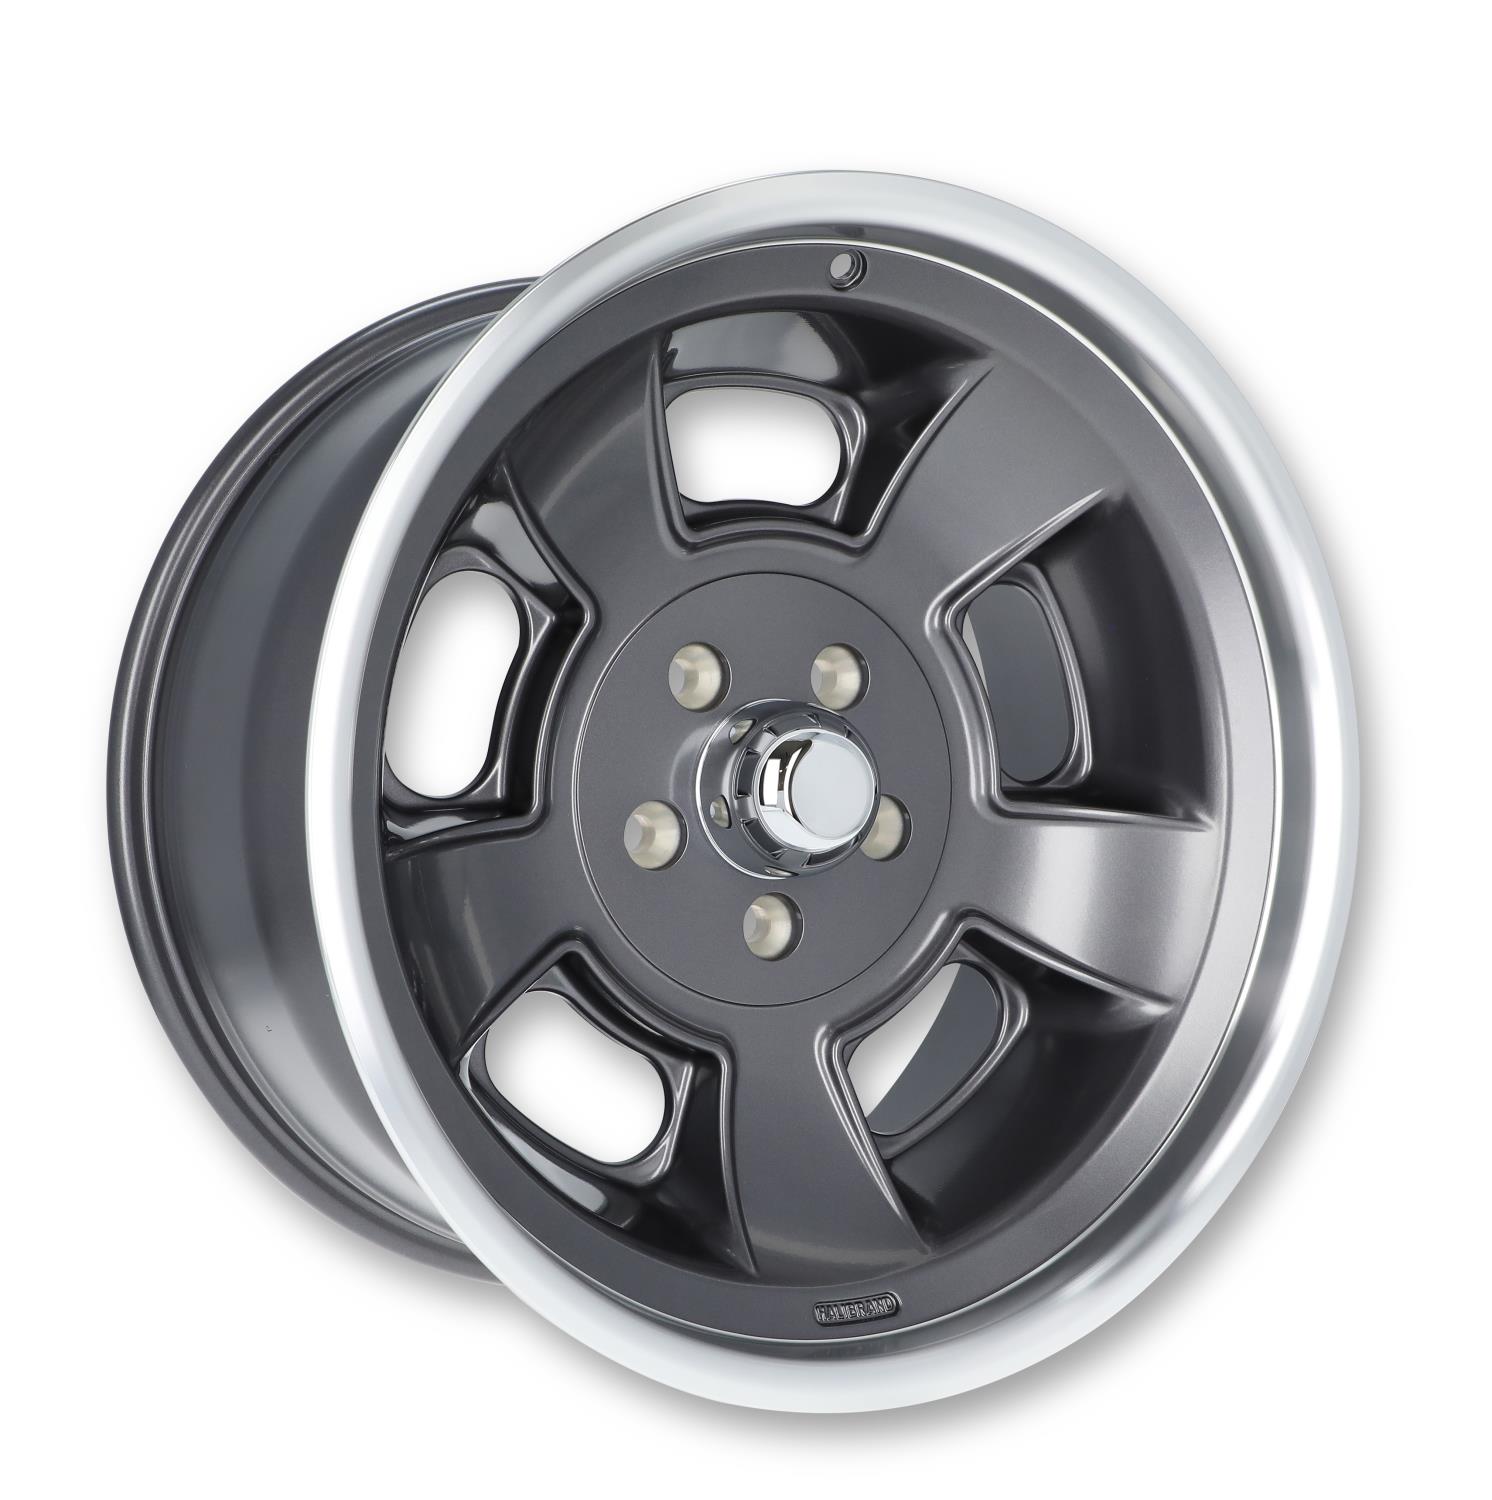 Sprint Rear Wheel, Size: 19x10", Bolt Pattern: 5x5", Backspace: 5.5" [Anthracite with Machined Lip - Semi Gloss Clearcoat]